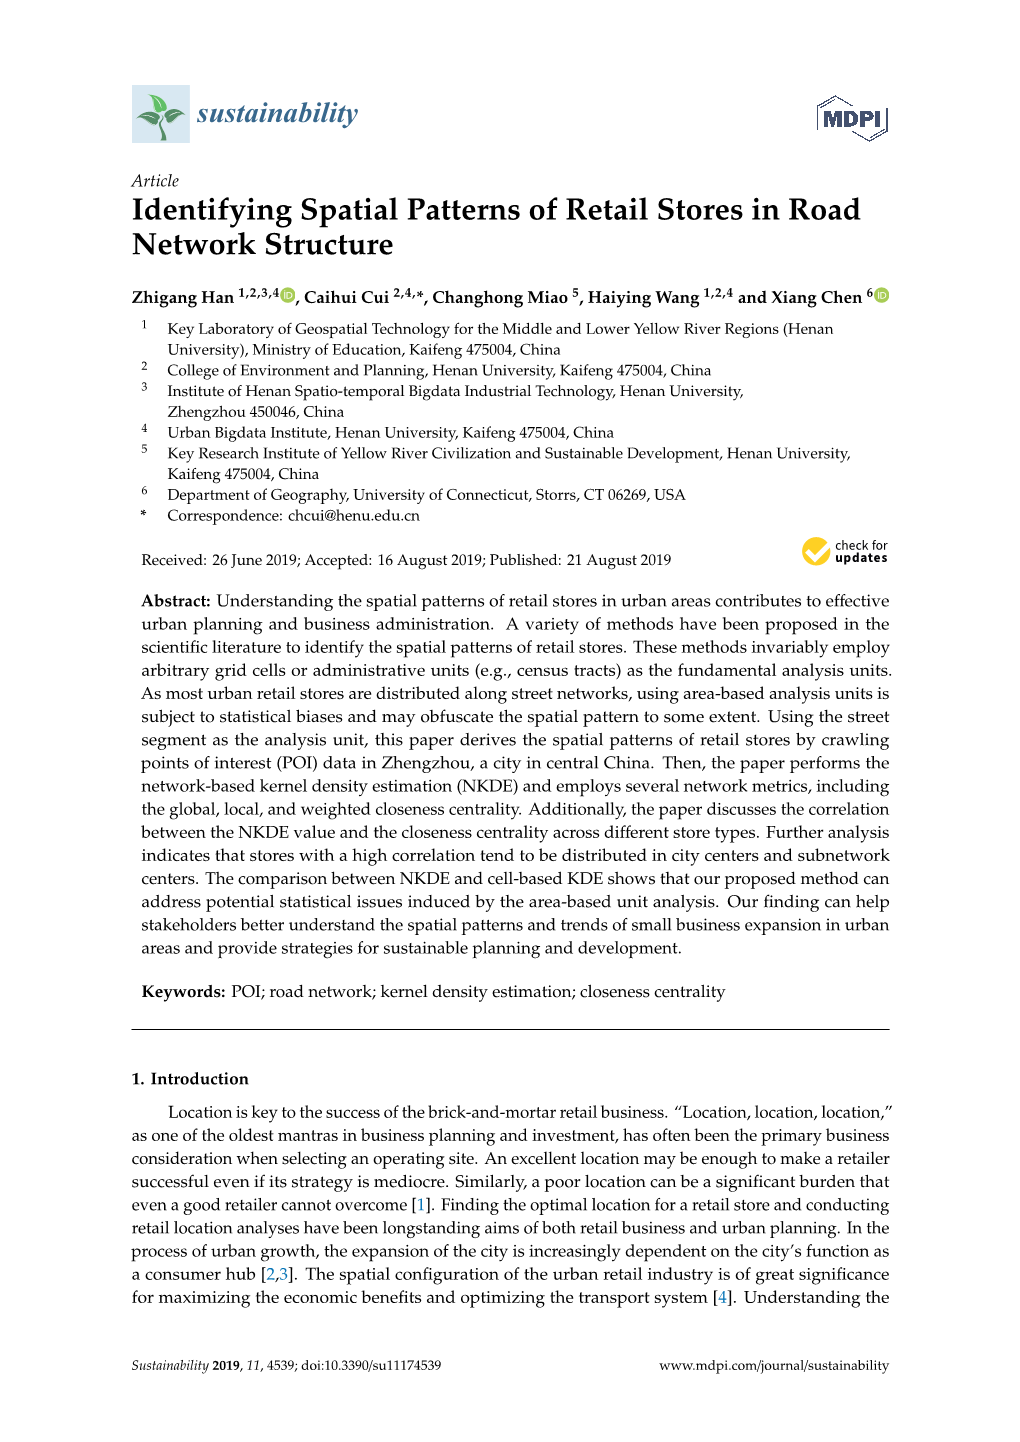 Identifying Spatial Patterns of Retail Stores in Road Network Structure